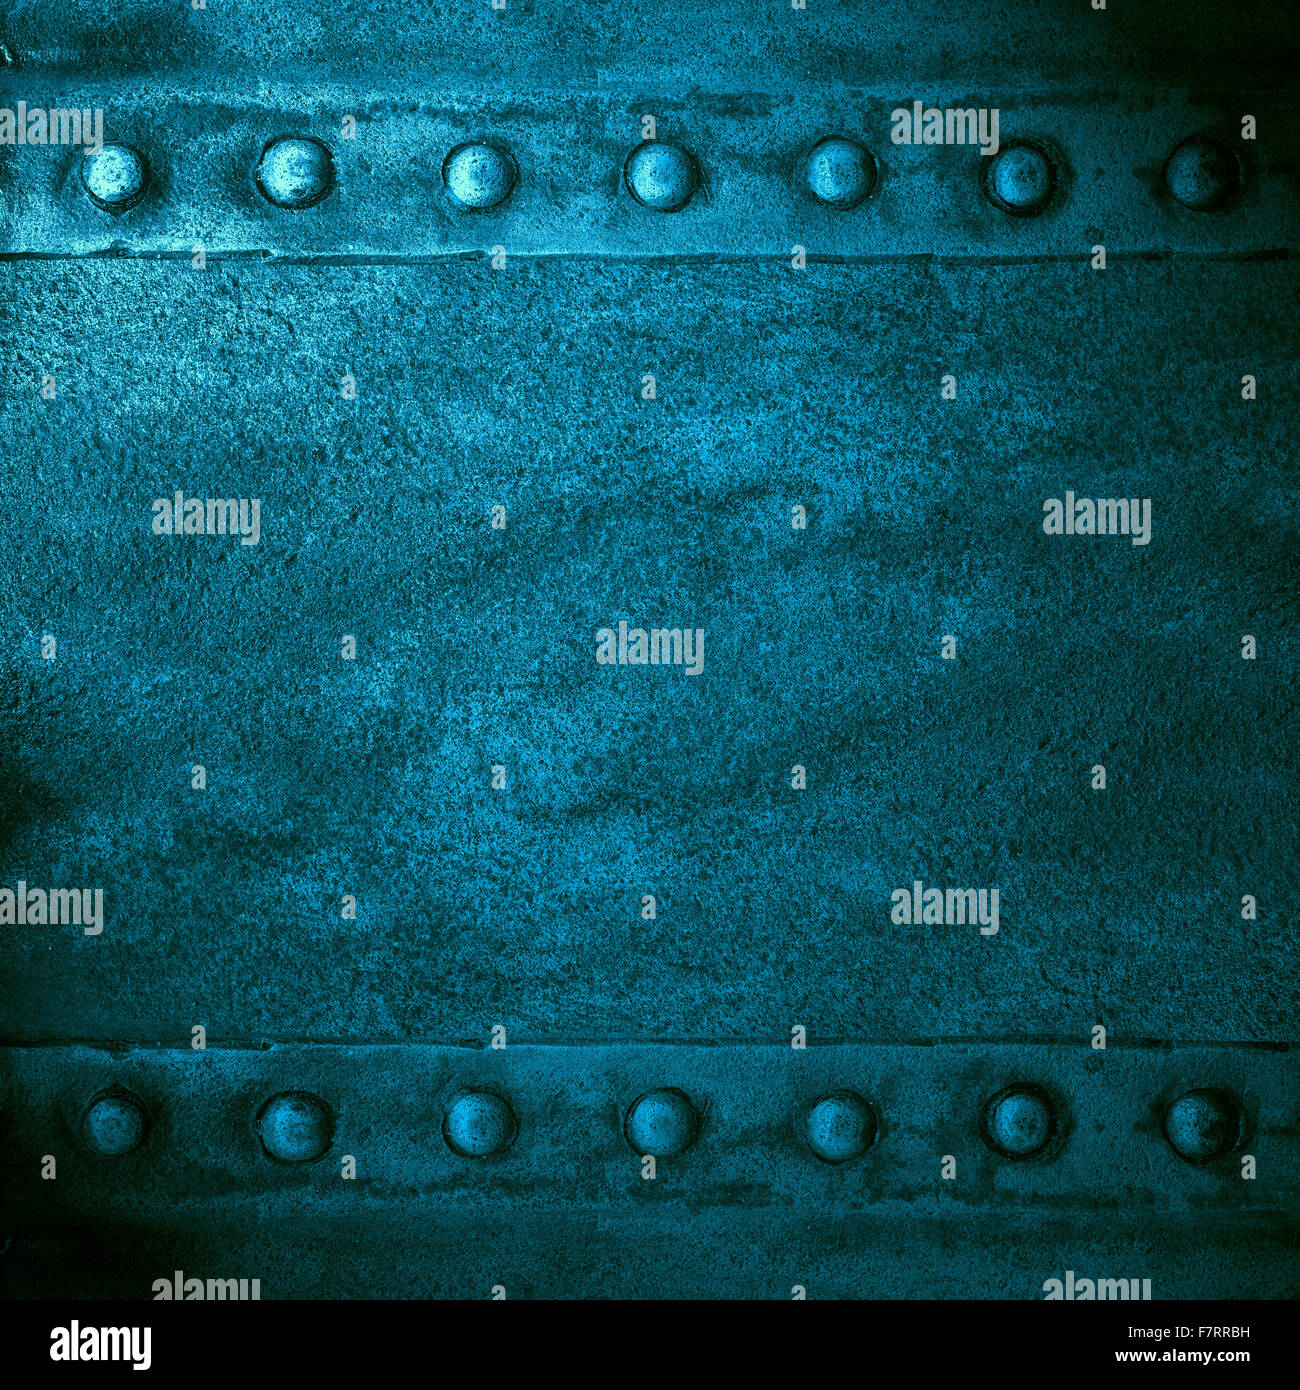 turquoise abstract background or rust steel texture Stock Photo